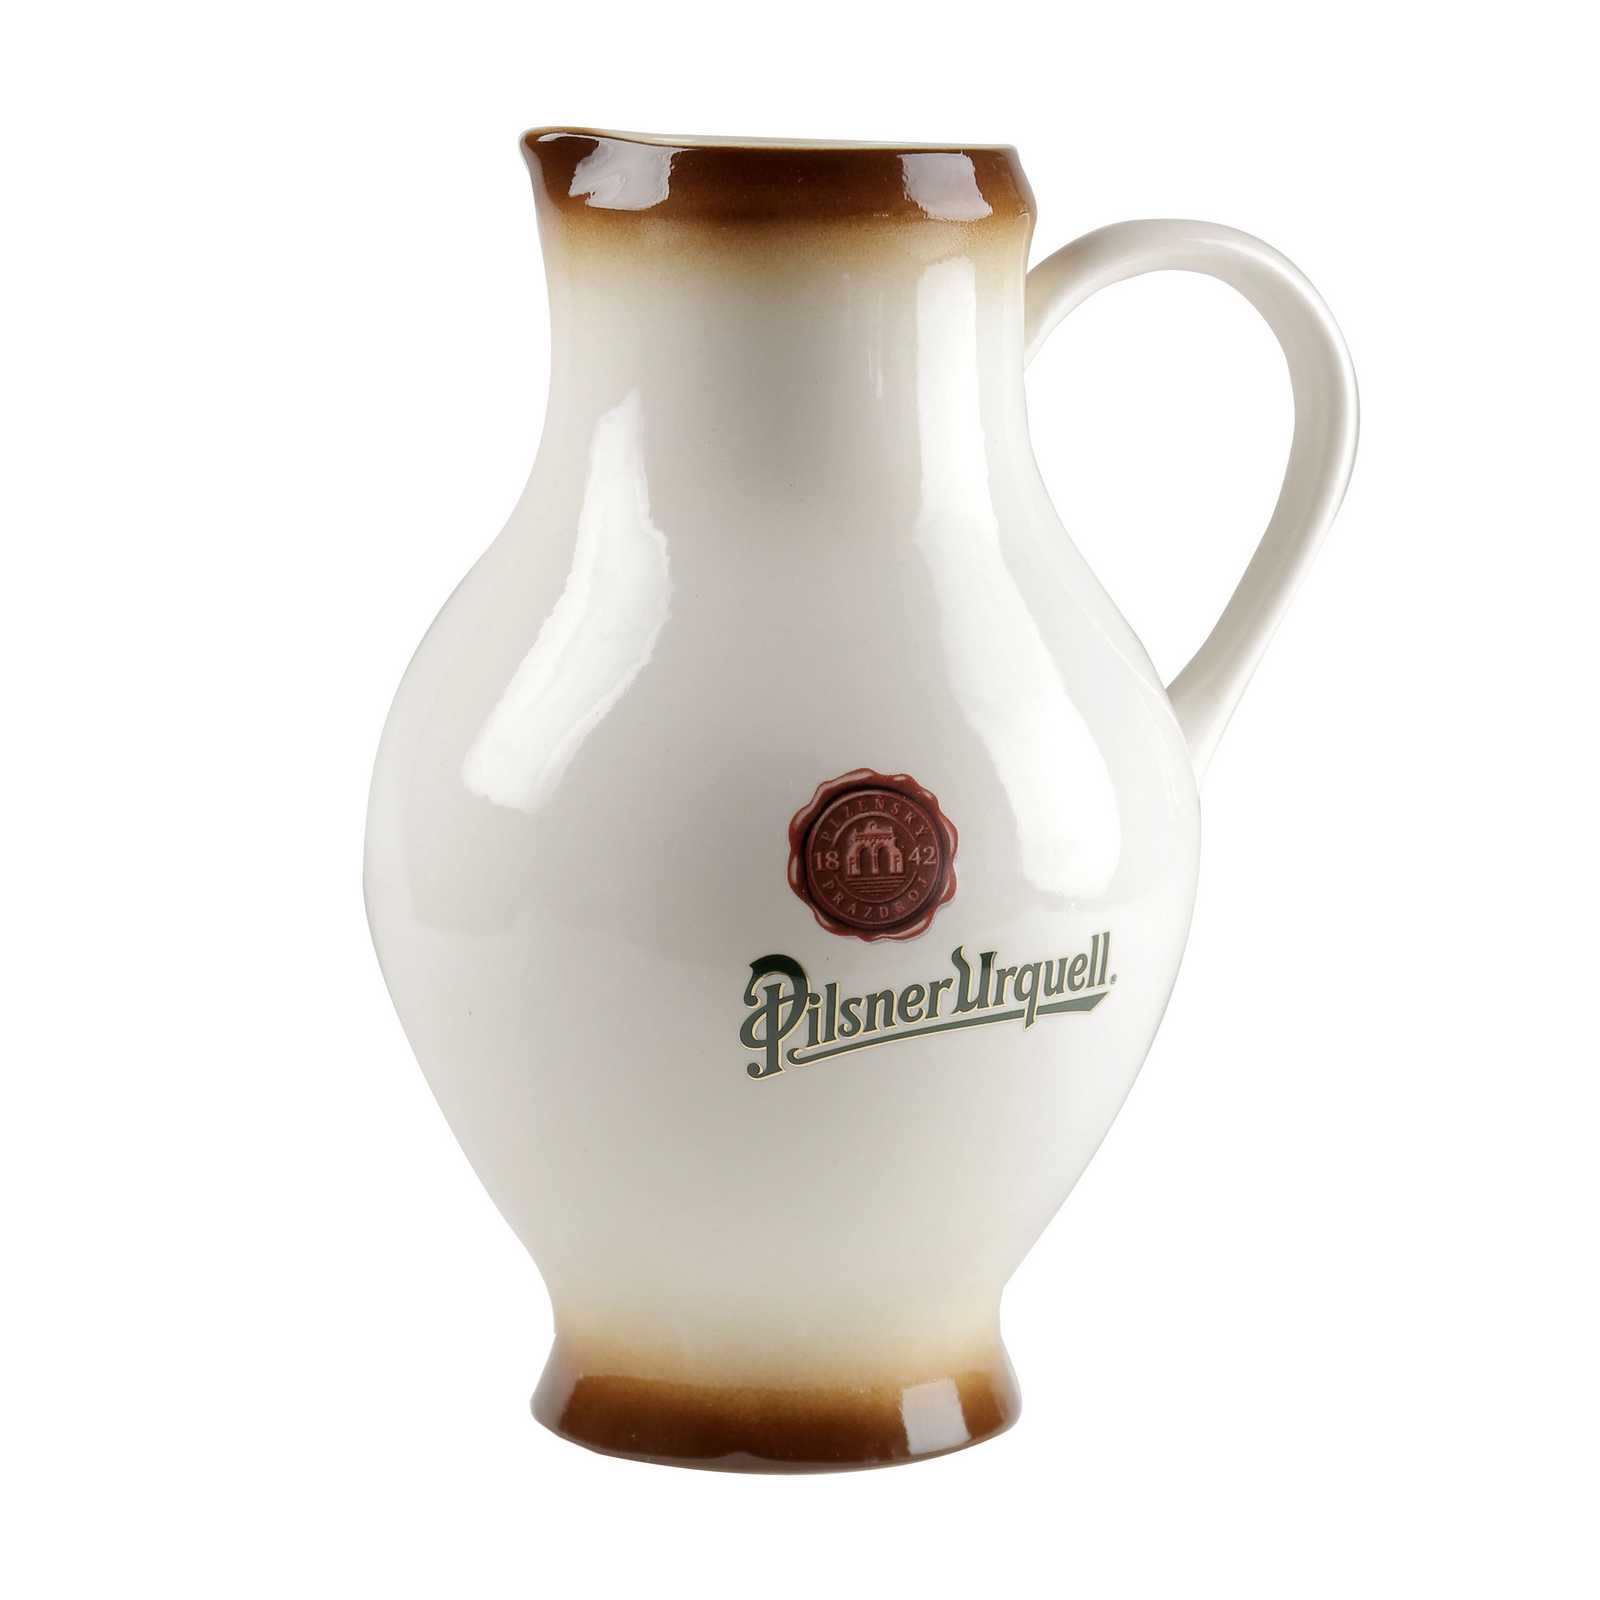 1.5 l beer pitcher with the Pilsner Urquell logo